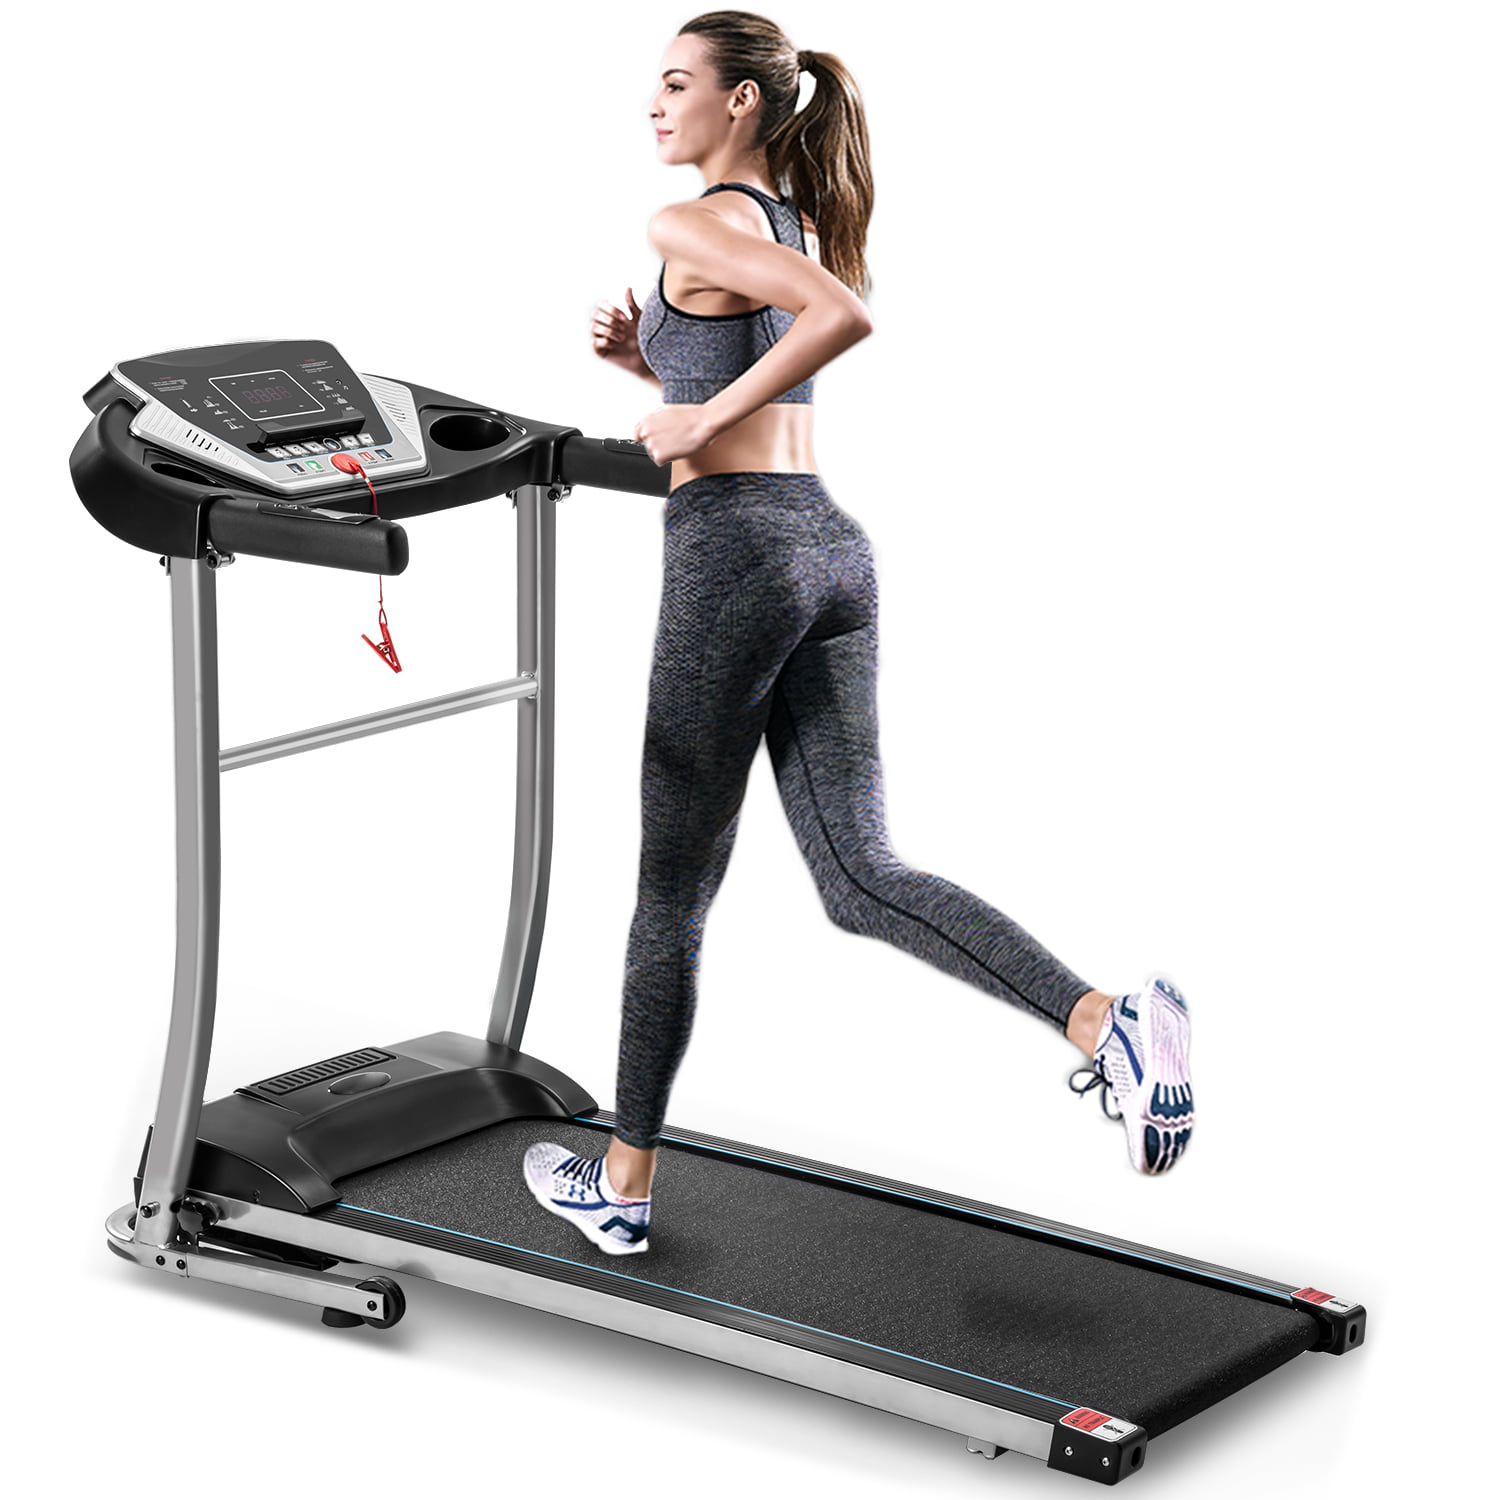 EGORUN Folding Treadmill for Home Electric Treadmill Running Exercise Machine Portable Compact Treadmill Foldable for Home Gym Fitness Workout Jogging Walking with 3 Manual inclines 